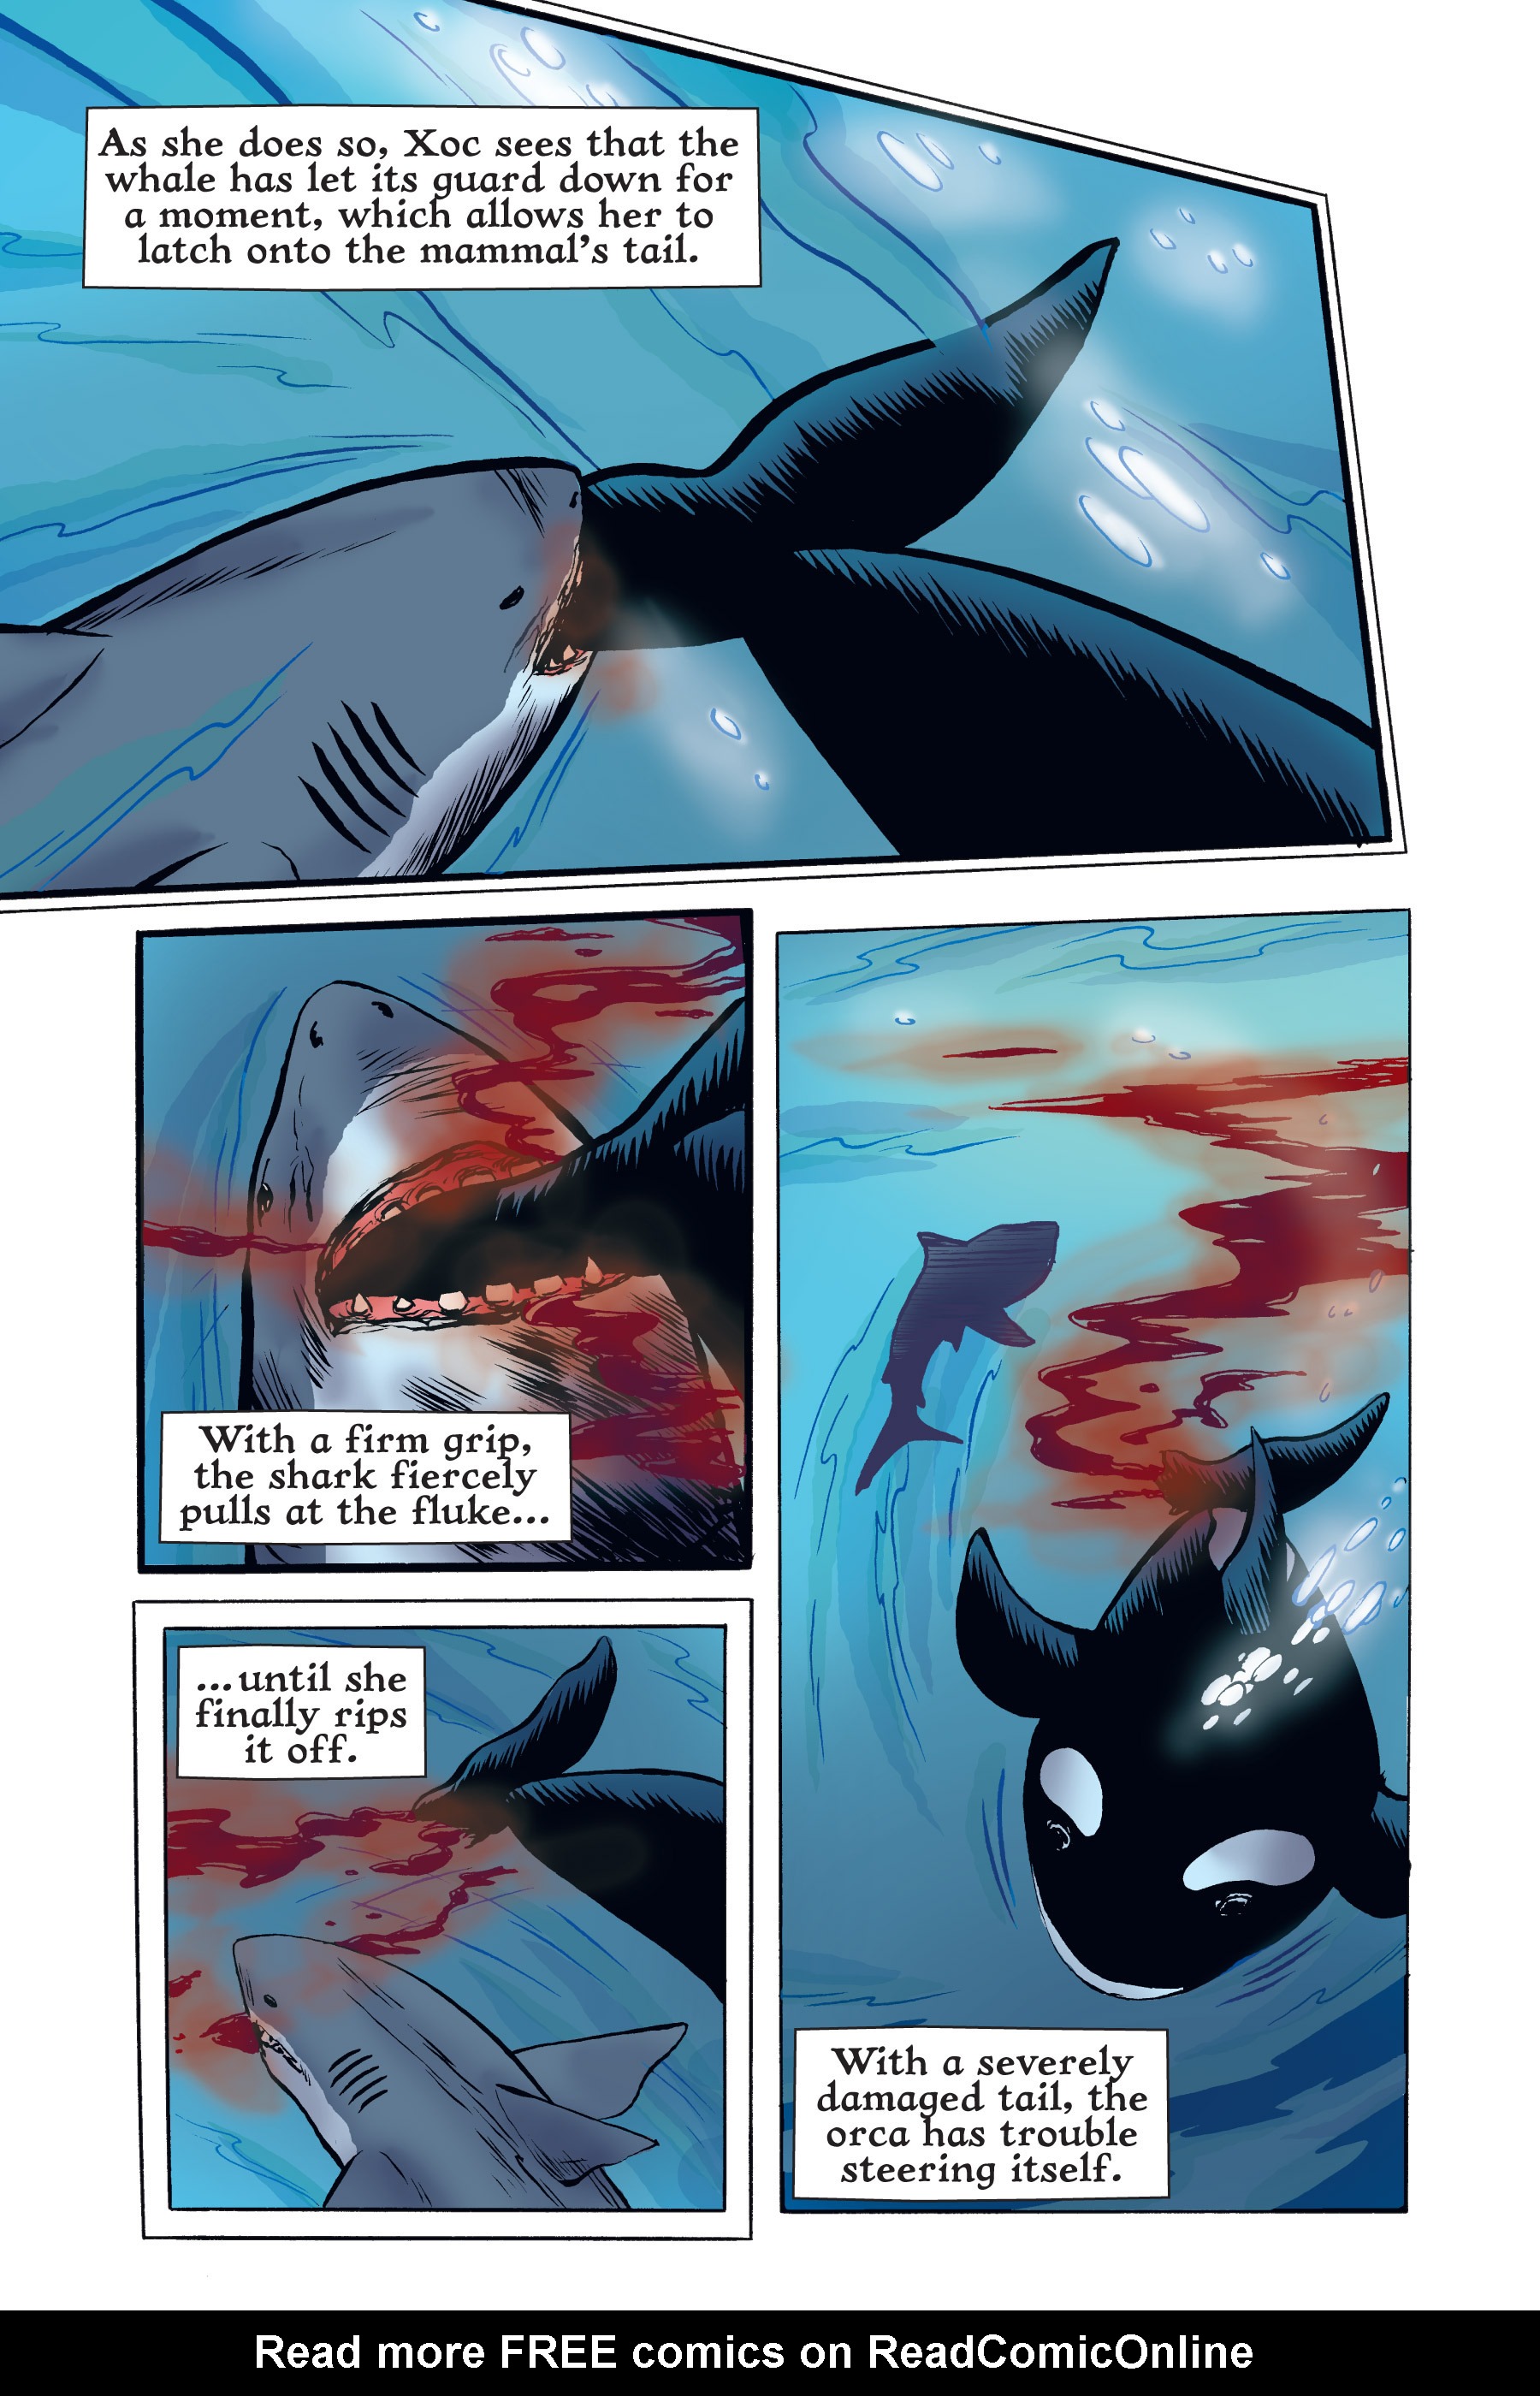 Read online Xoc: Journey of a Great White comic -  Issue # TPB - 121